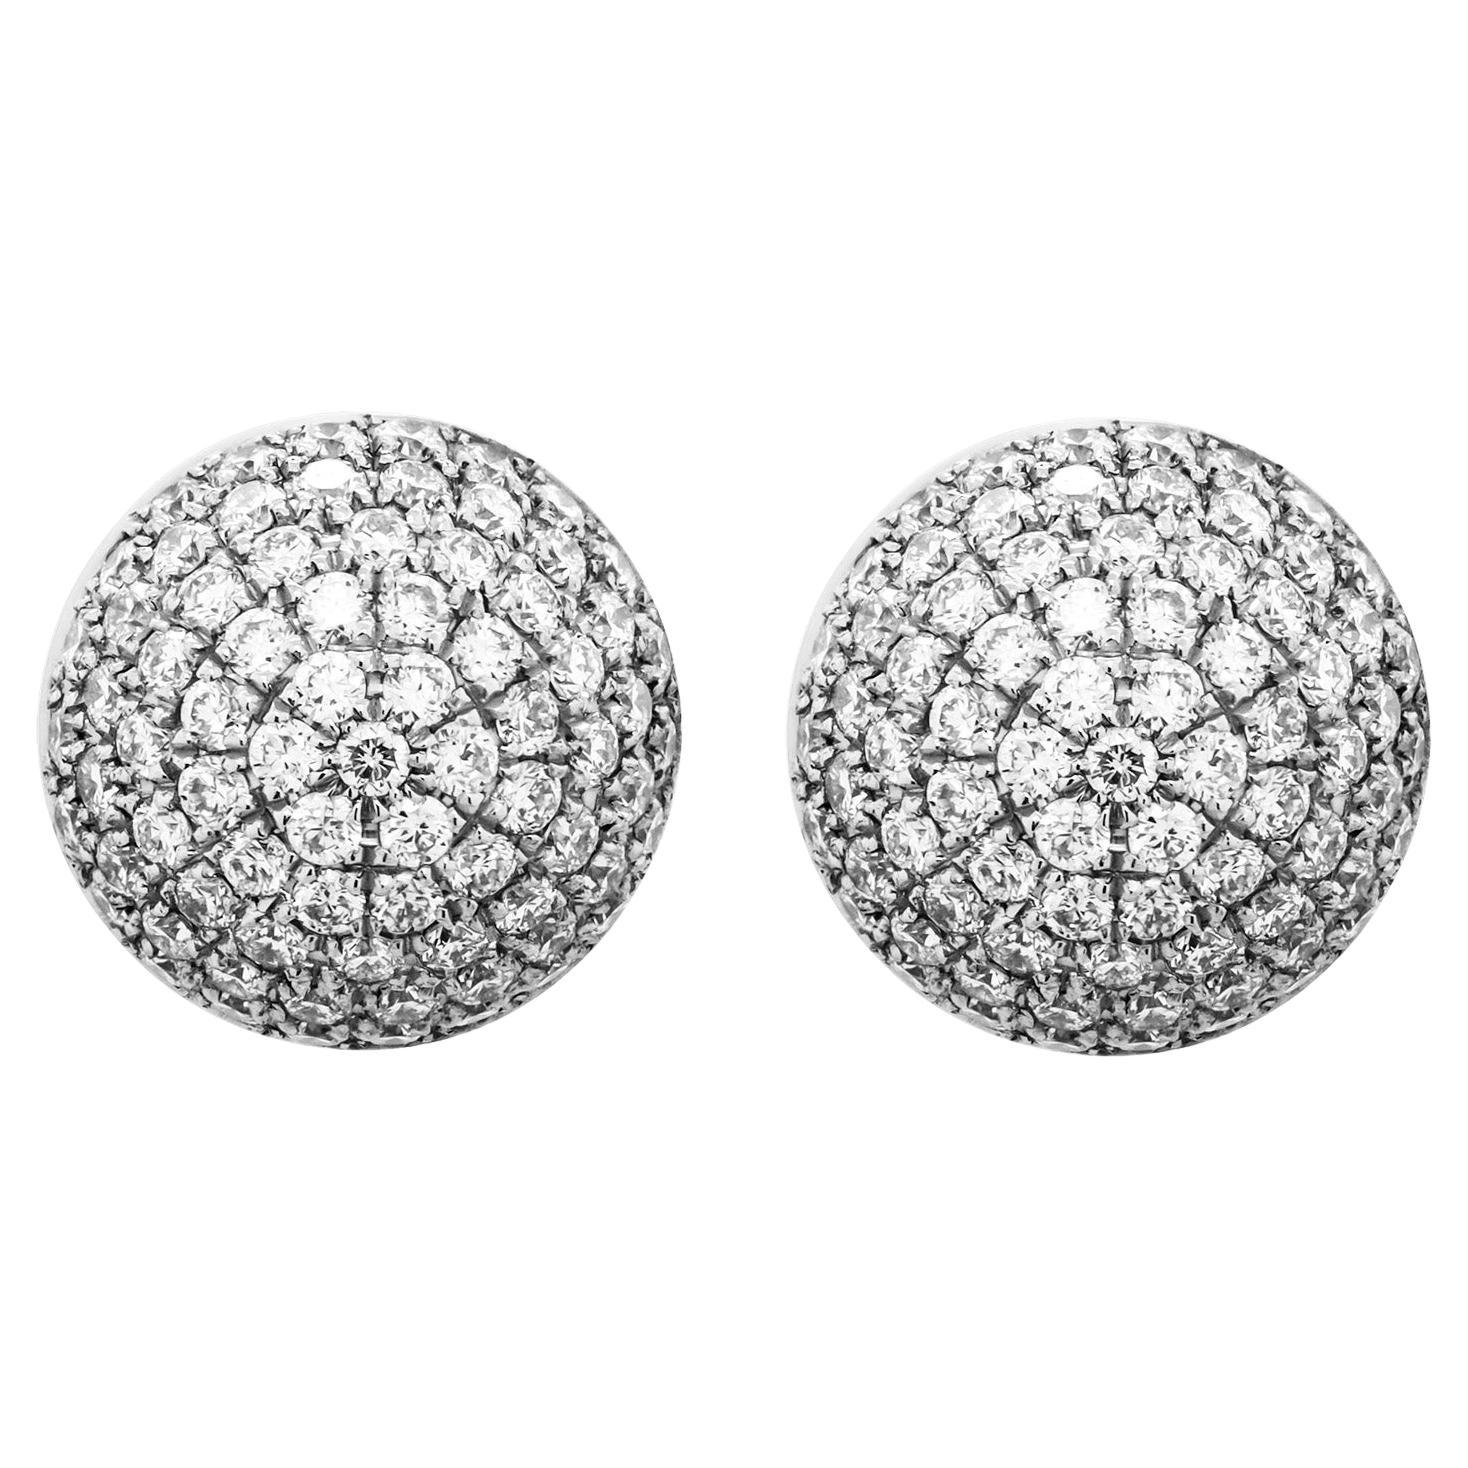 14K White Gold Diamond Bubble Stud Earrings 
Total Carat Weight: 1 ct
10MM 

